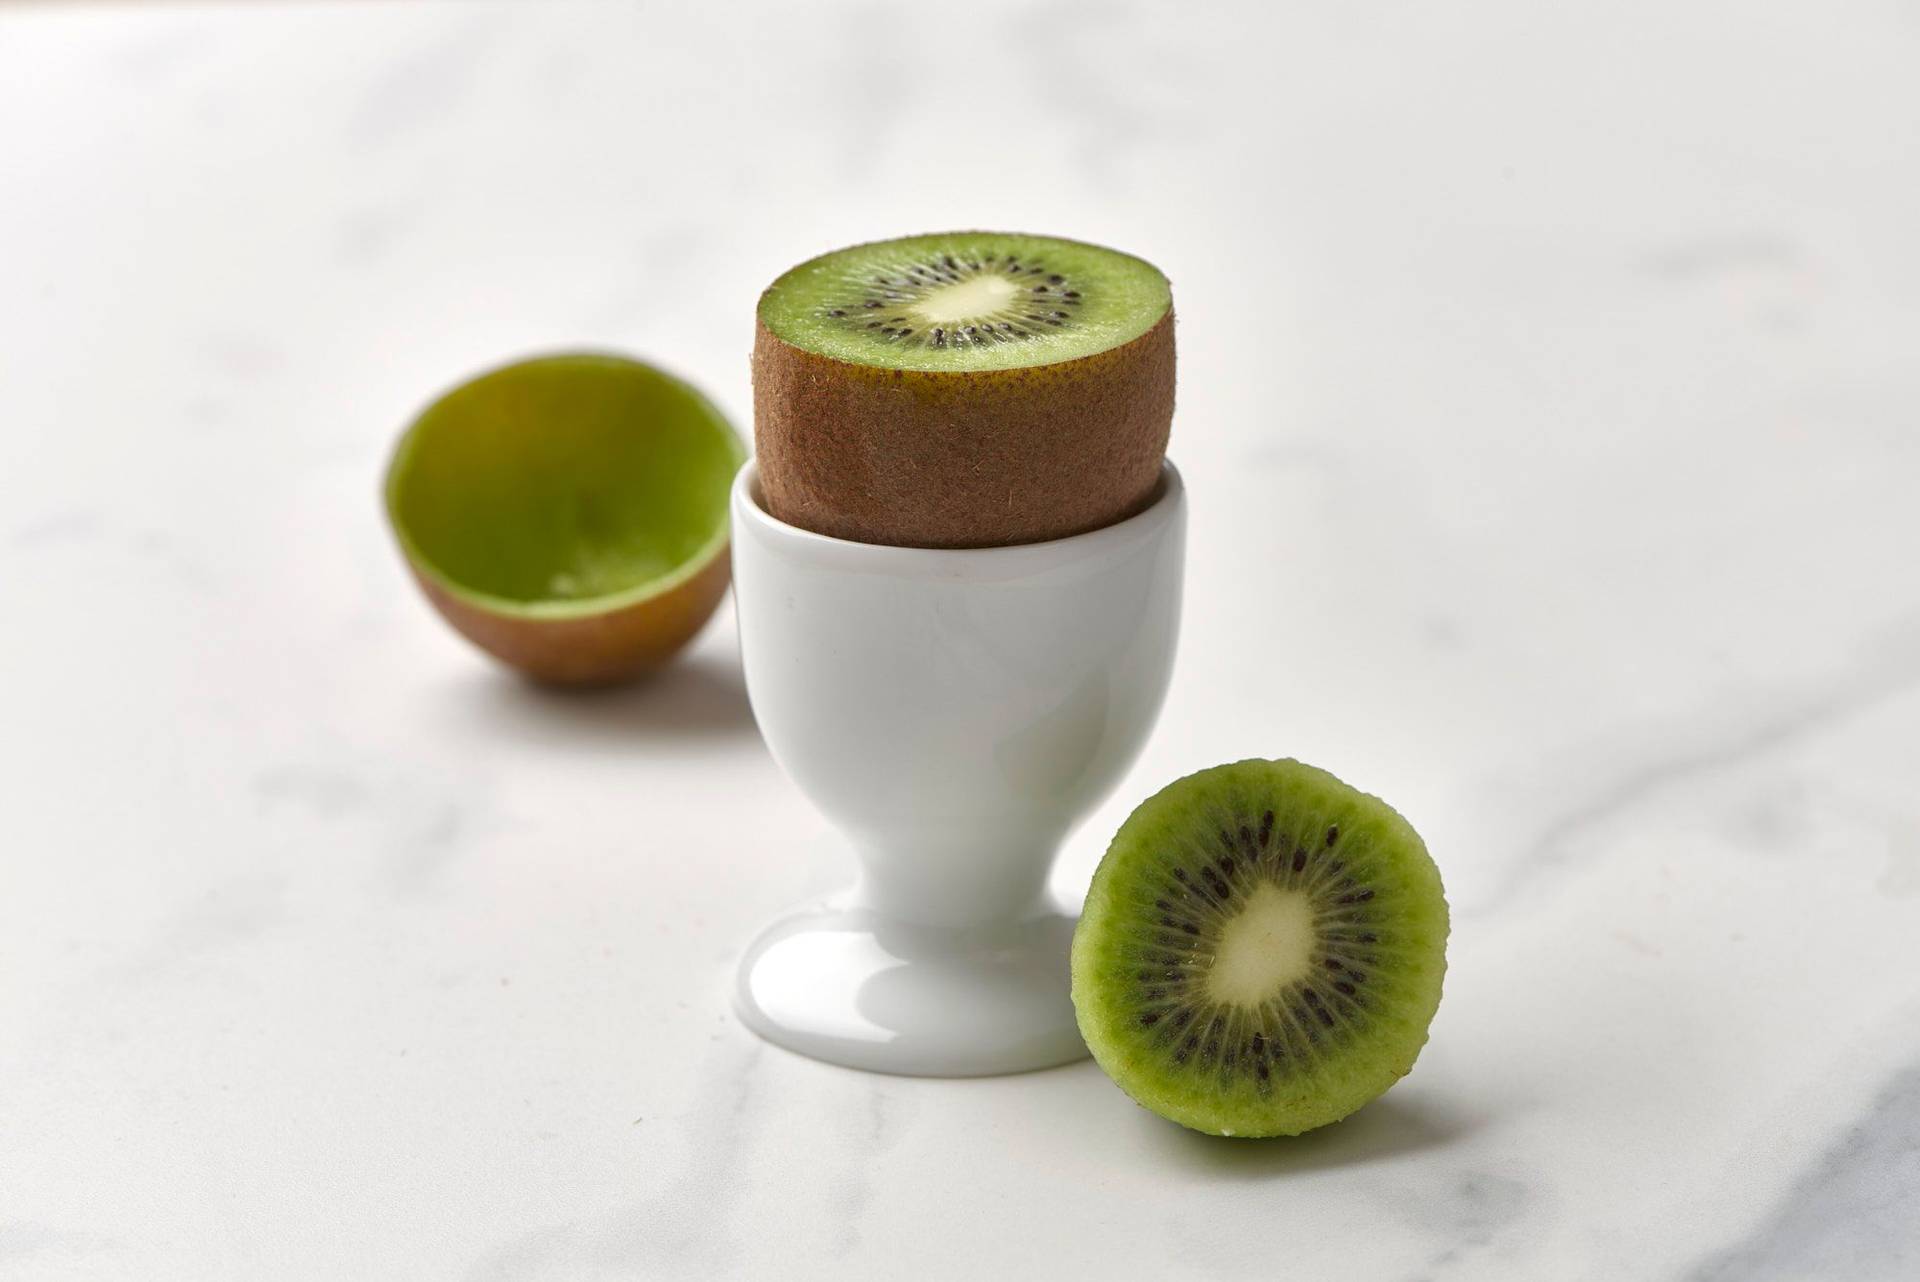 a zespri kiwi in an egg cup with a marbled sapienstone top